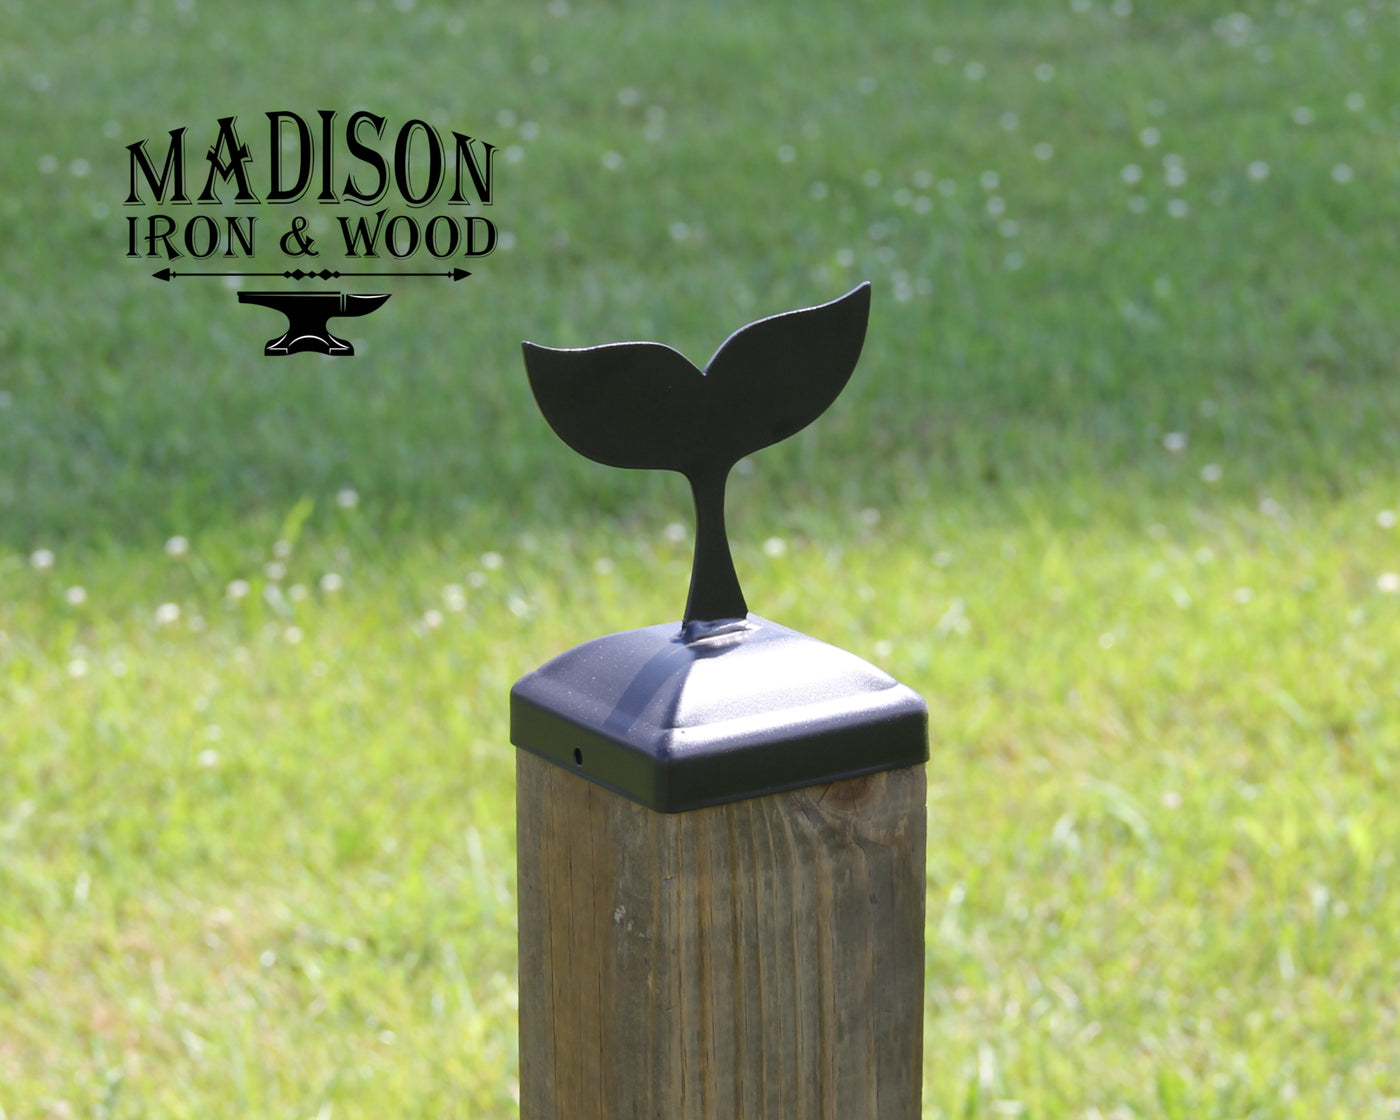 4x4 Whale Tail Post Cap - Madison Iron and Wood - Post Cap - metal outdoor decor - Steel deocrations - american made products - veteran owned business products - fencing decorations - fencing supplies - custom wall decorations - personalized wall signs - steel - decorative post caps - steel post caps - metal post caps - brackets - structural brackets - home improvement - easter - easter decorations - easter gift - easter yard decor